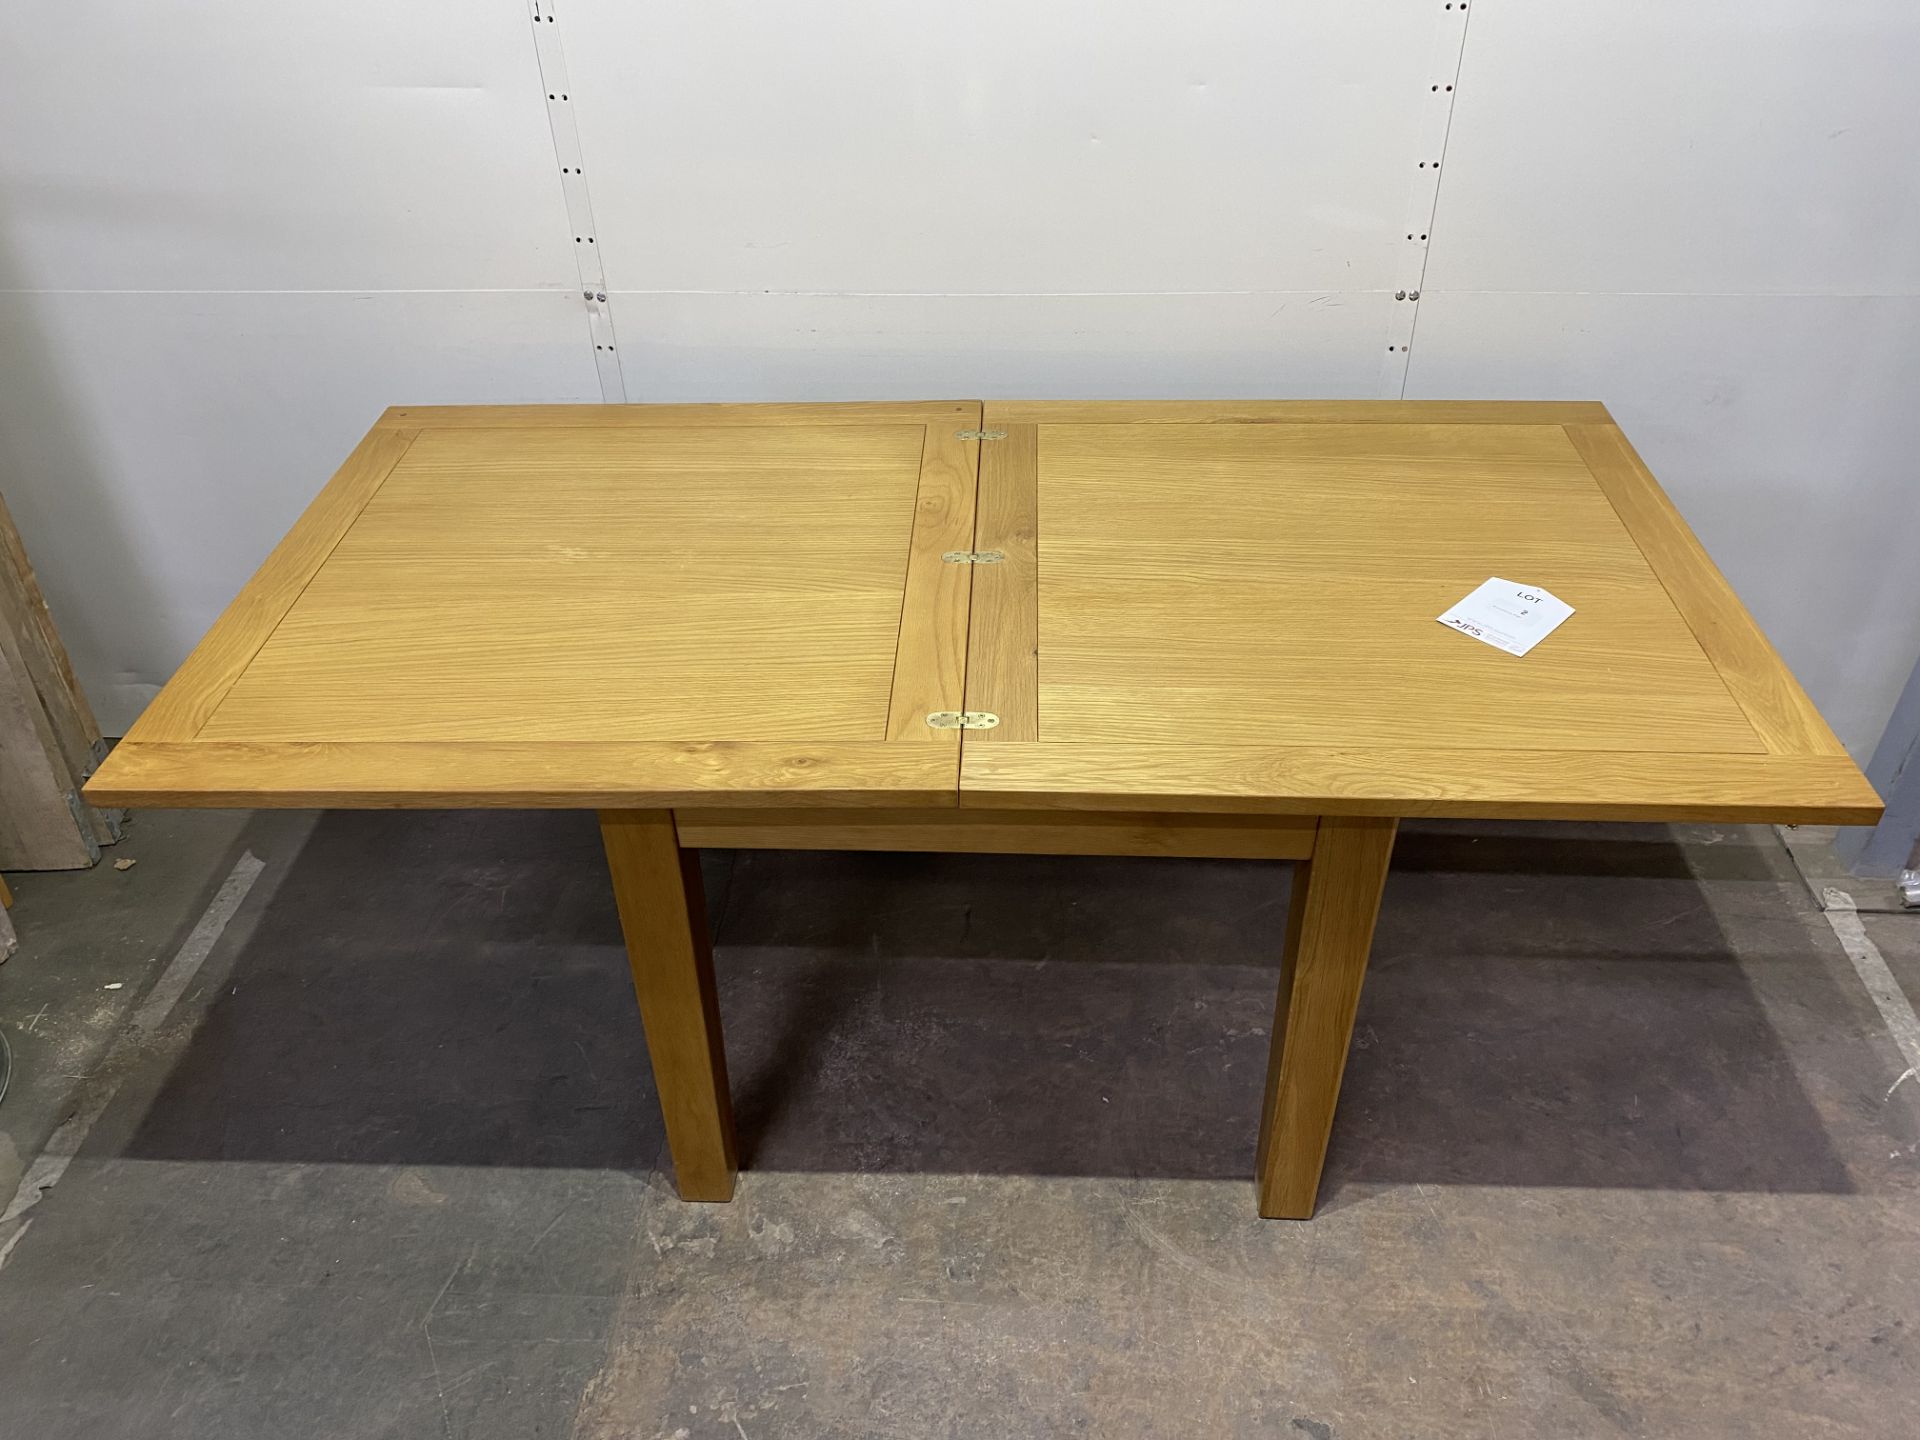 90cm - 180cm Foldable Wooden Dining Table - Image 4 of 6